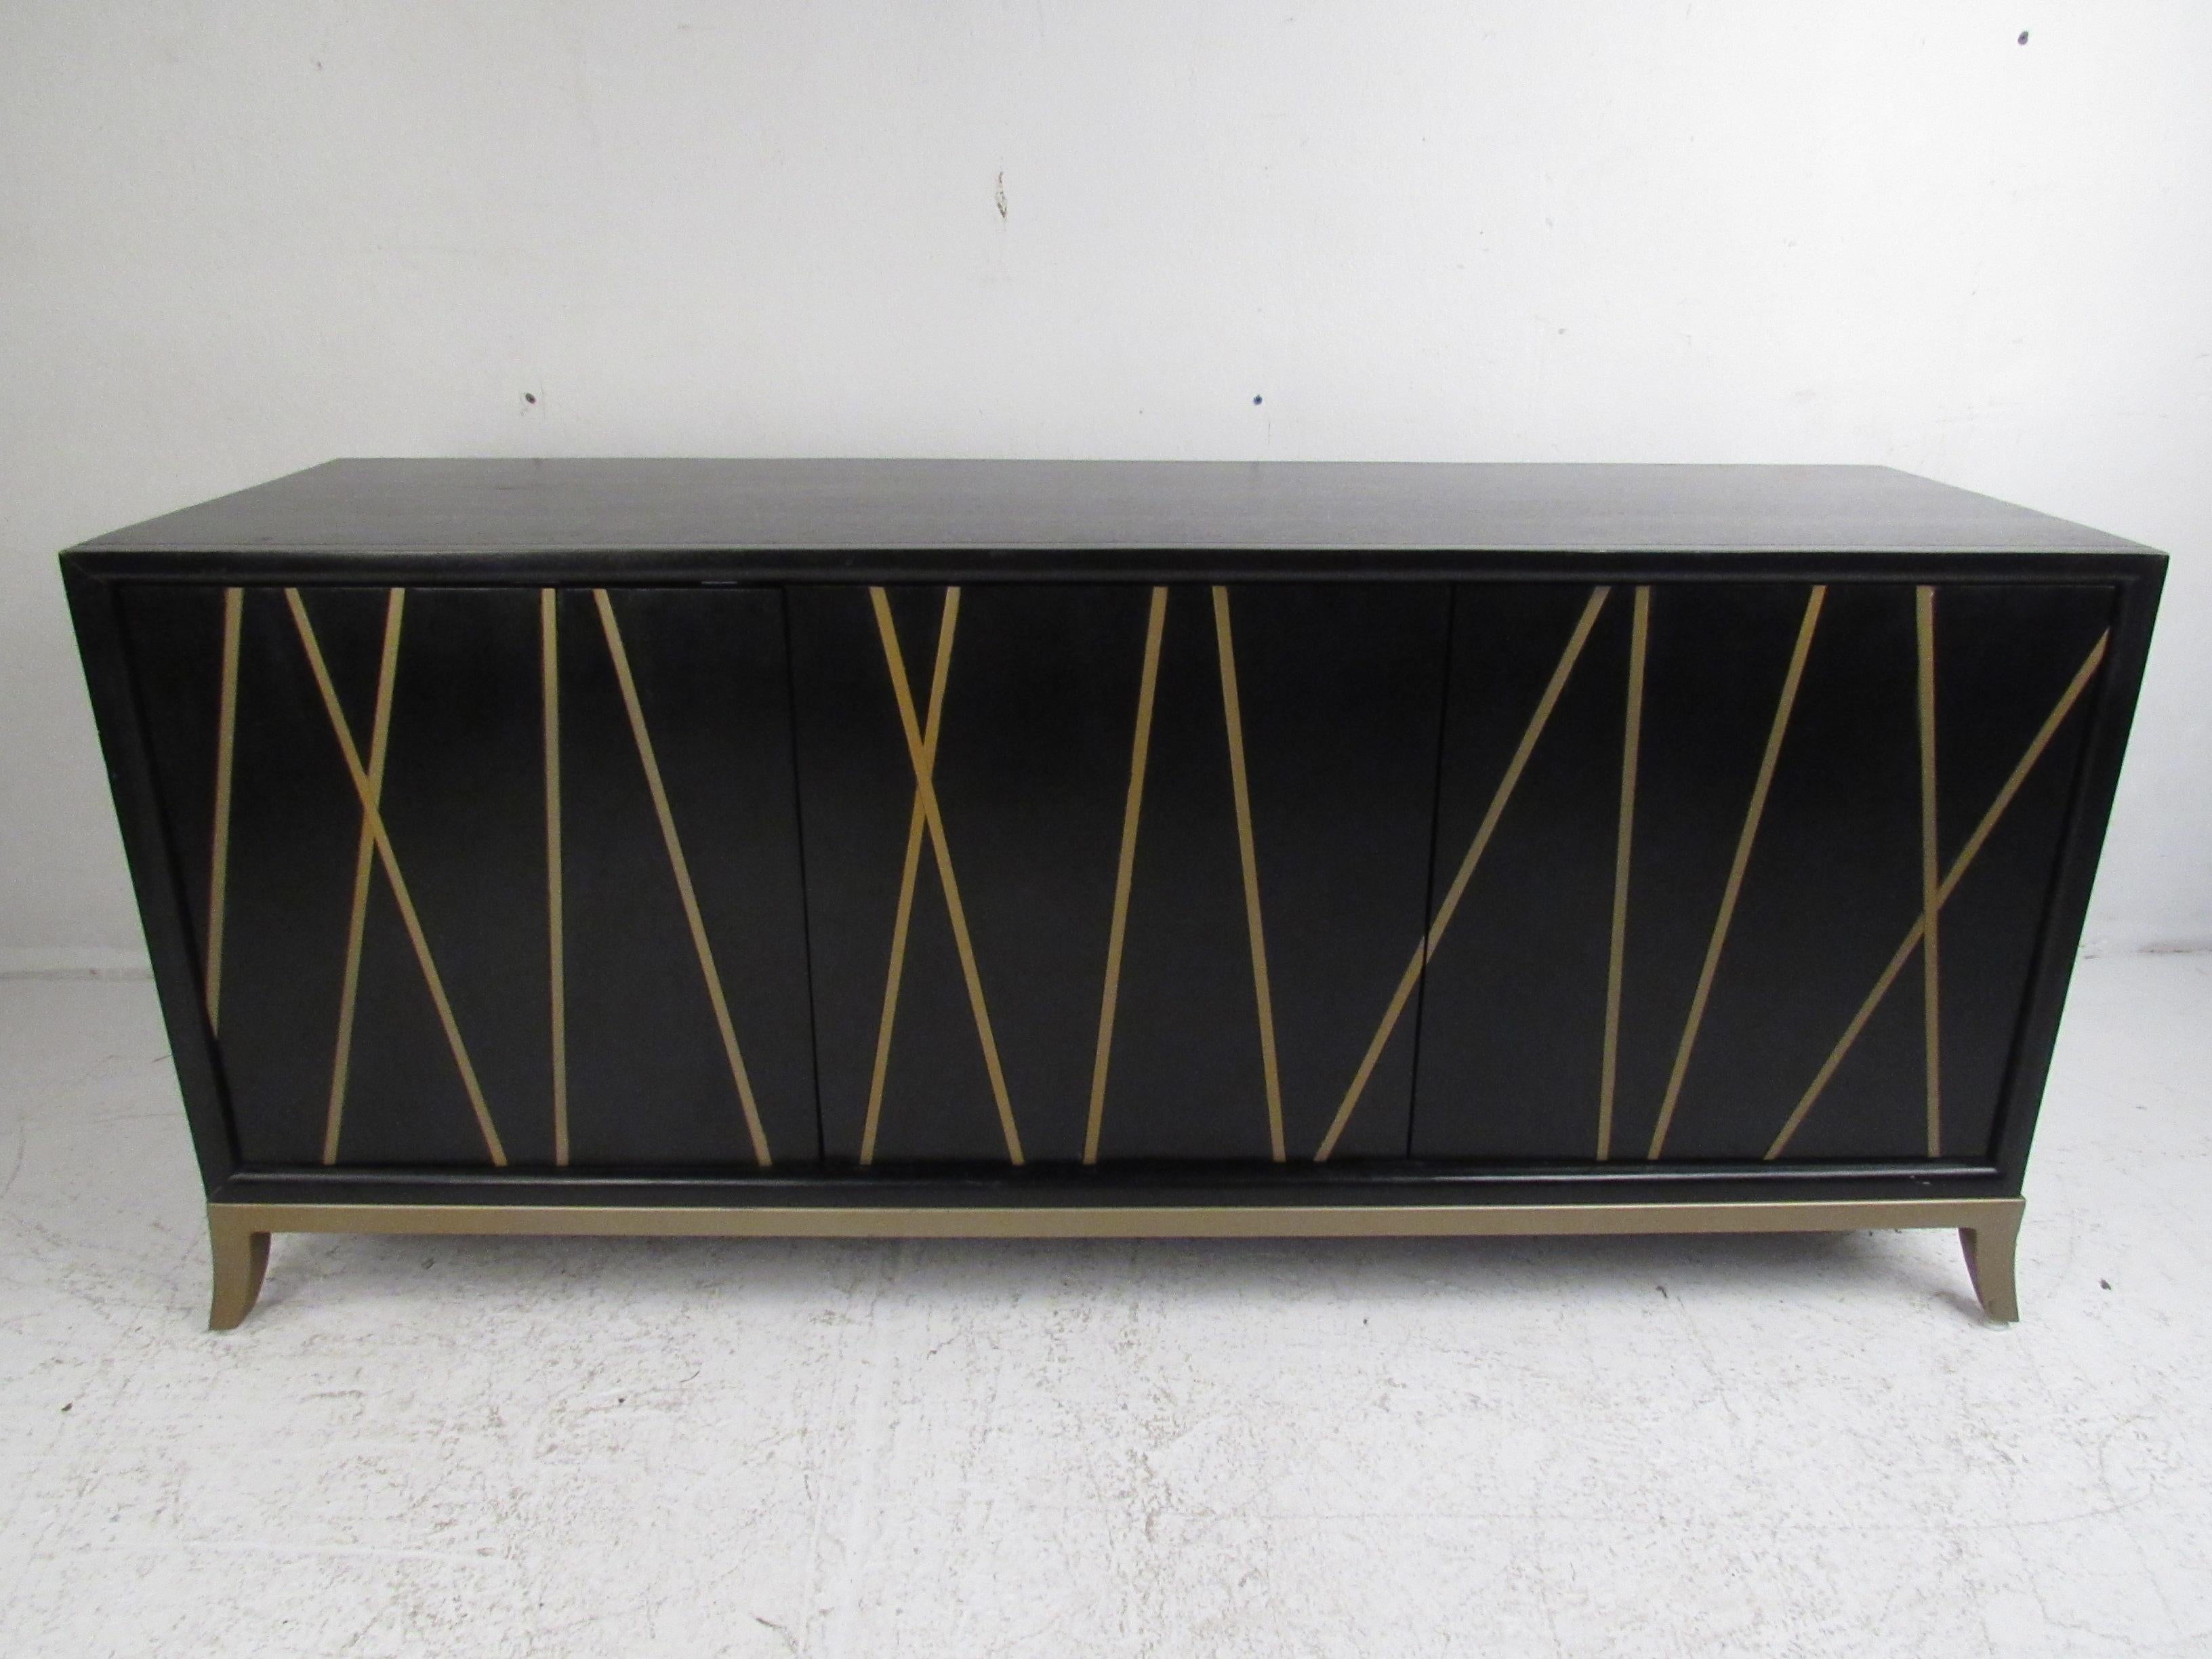 This sleek contemporary modern buffet features a two-tone design painted black with slightly embossed gold/brass colored lines on the front. A functional and stylish case piece with two cabinet doors that open to unveil a large storage compartment.